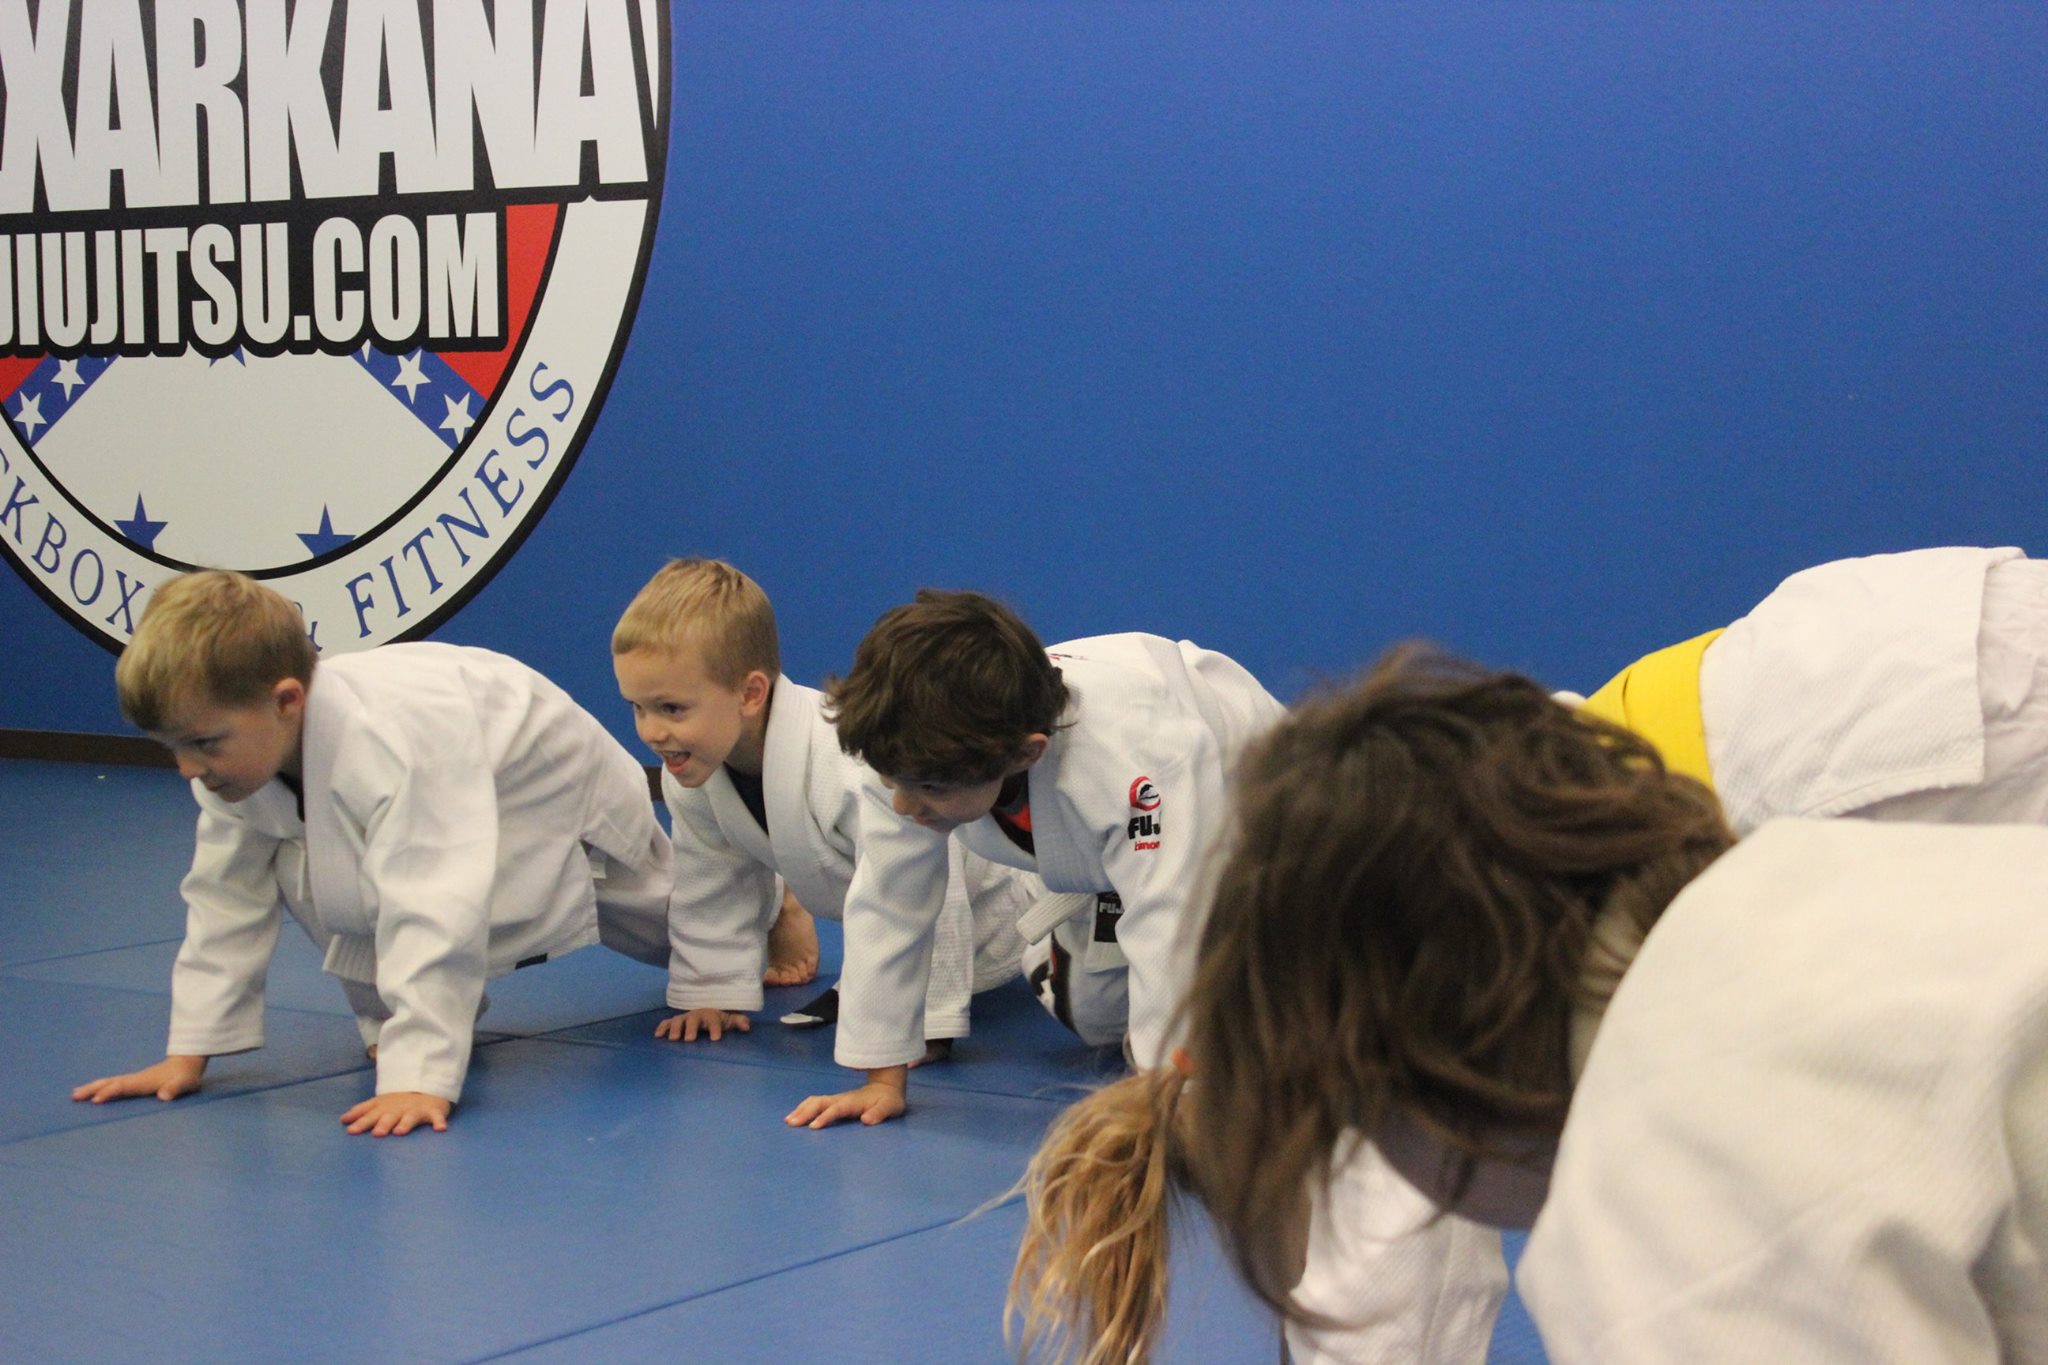 Kids fitness, exercise, and martial arts in texarkana